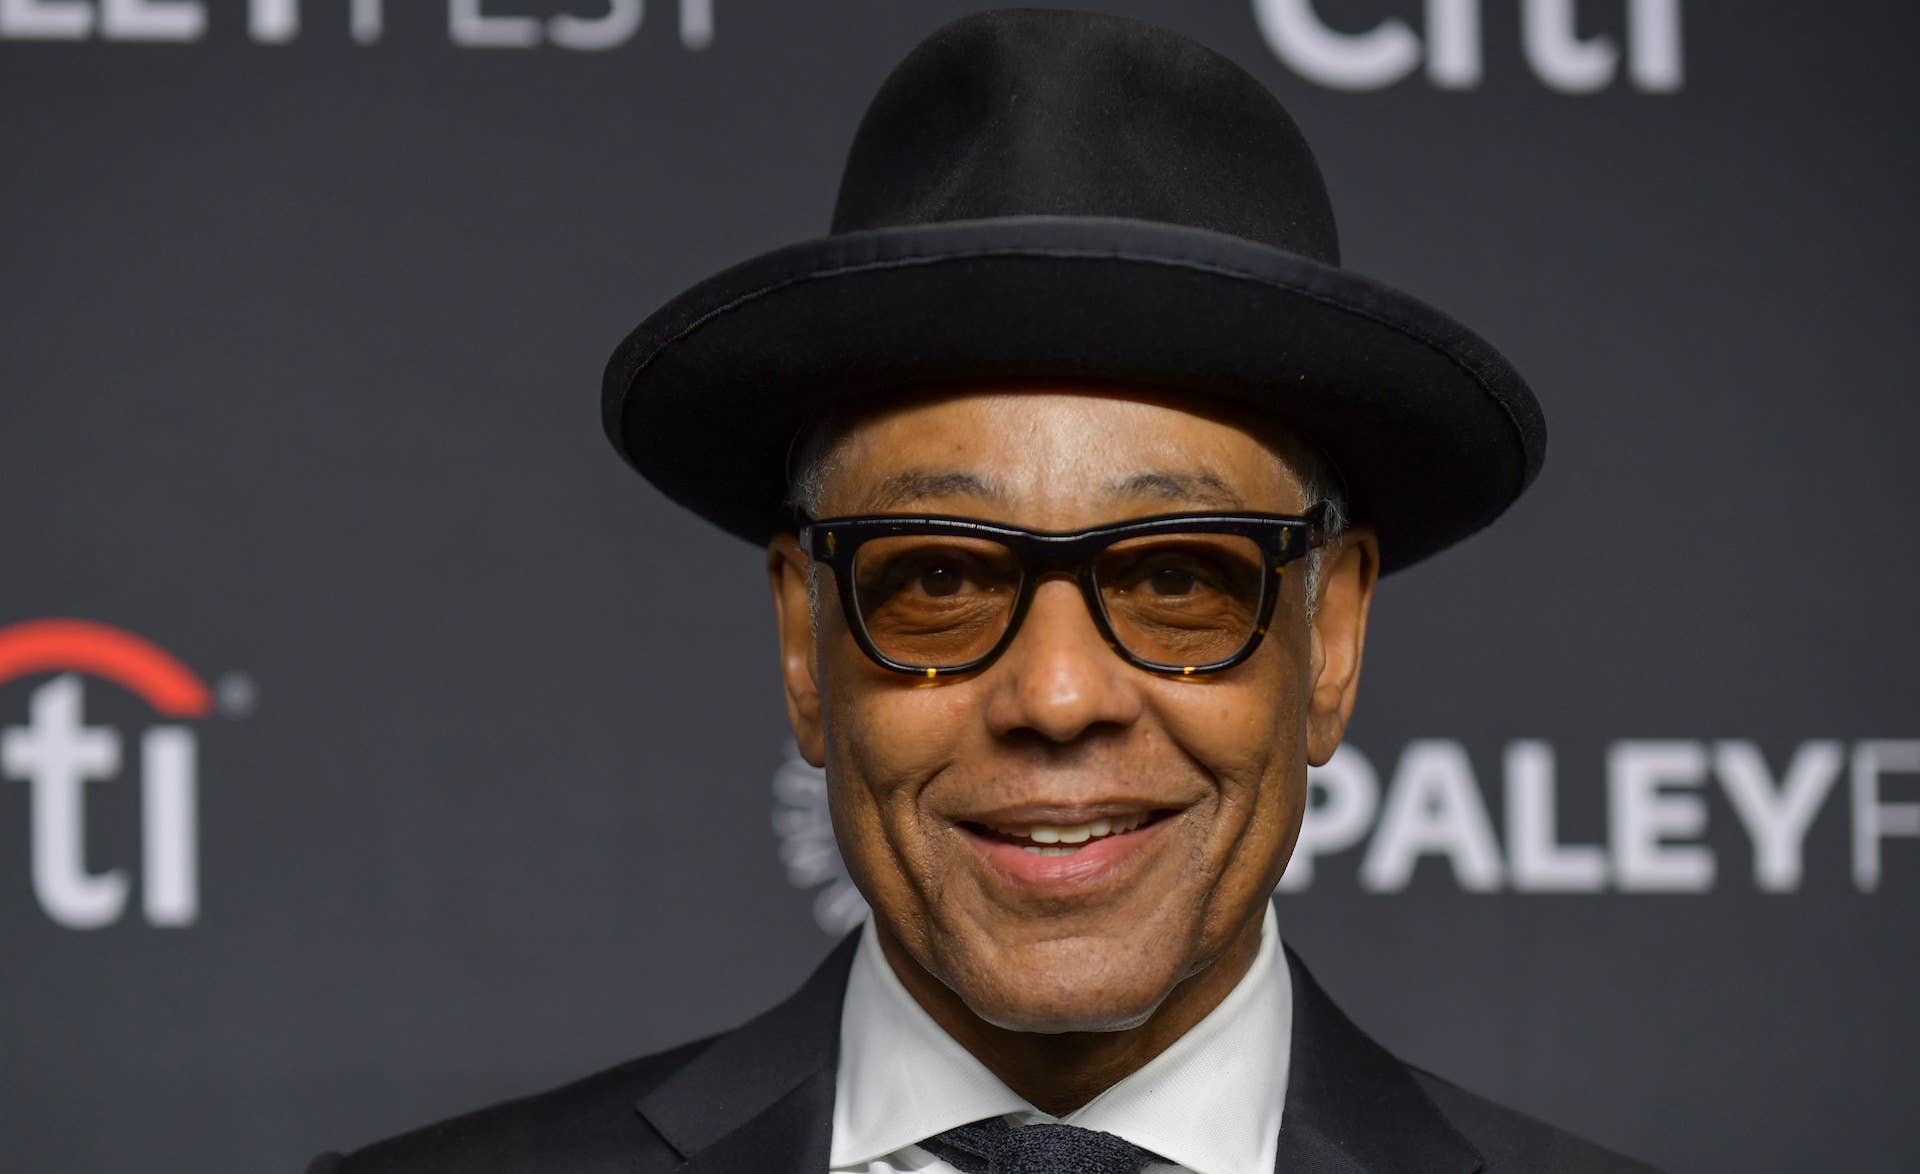 Giancarlo Esposito at Paley Fest in Los Angeles